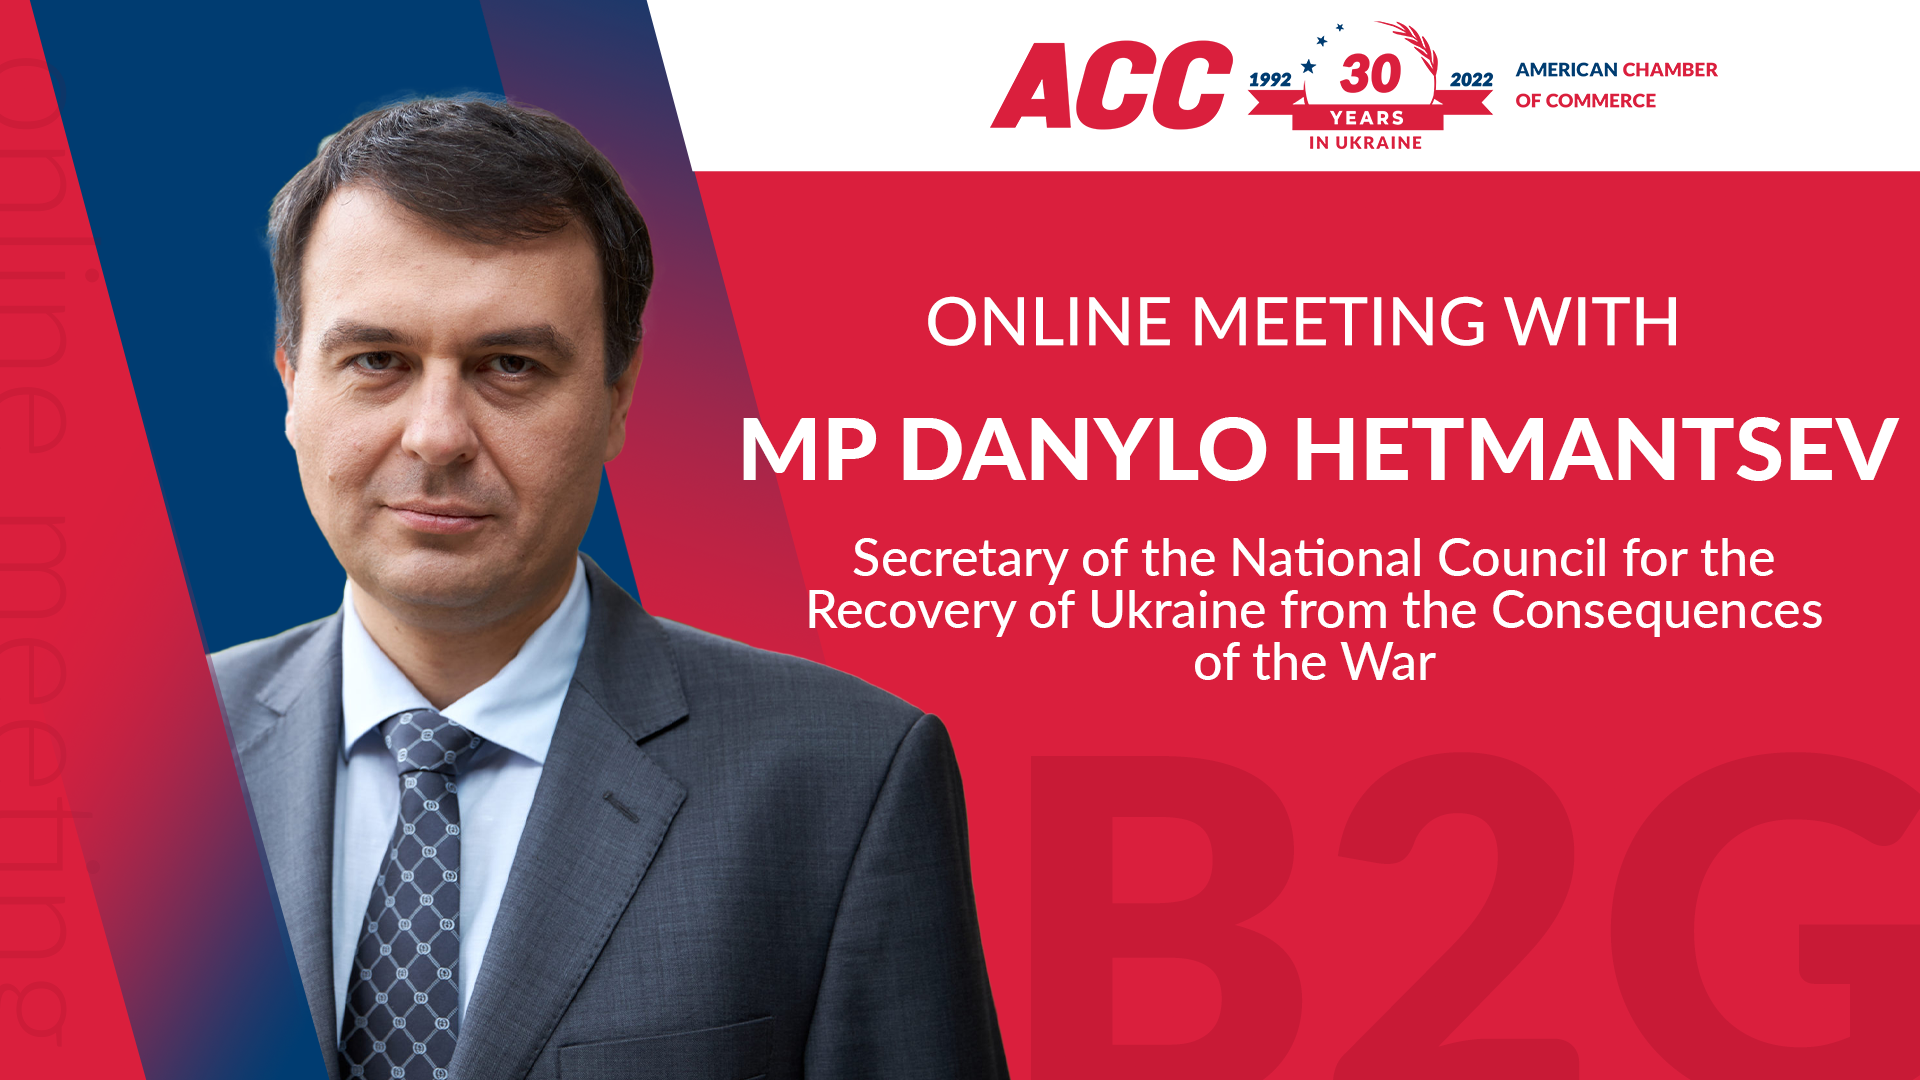 Online Chamber Meeting with MP Danylo Hetmantsev, Secretary of the National Council for the Recovery of Ukraine from the Consequences of the War